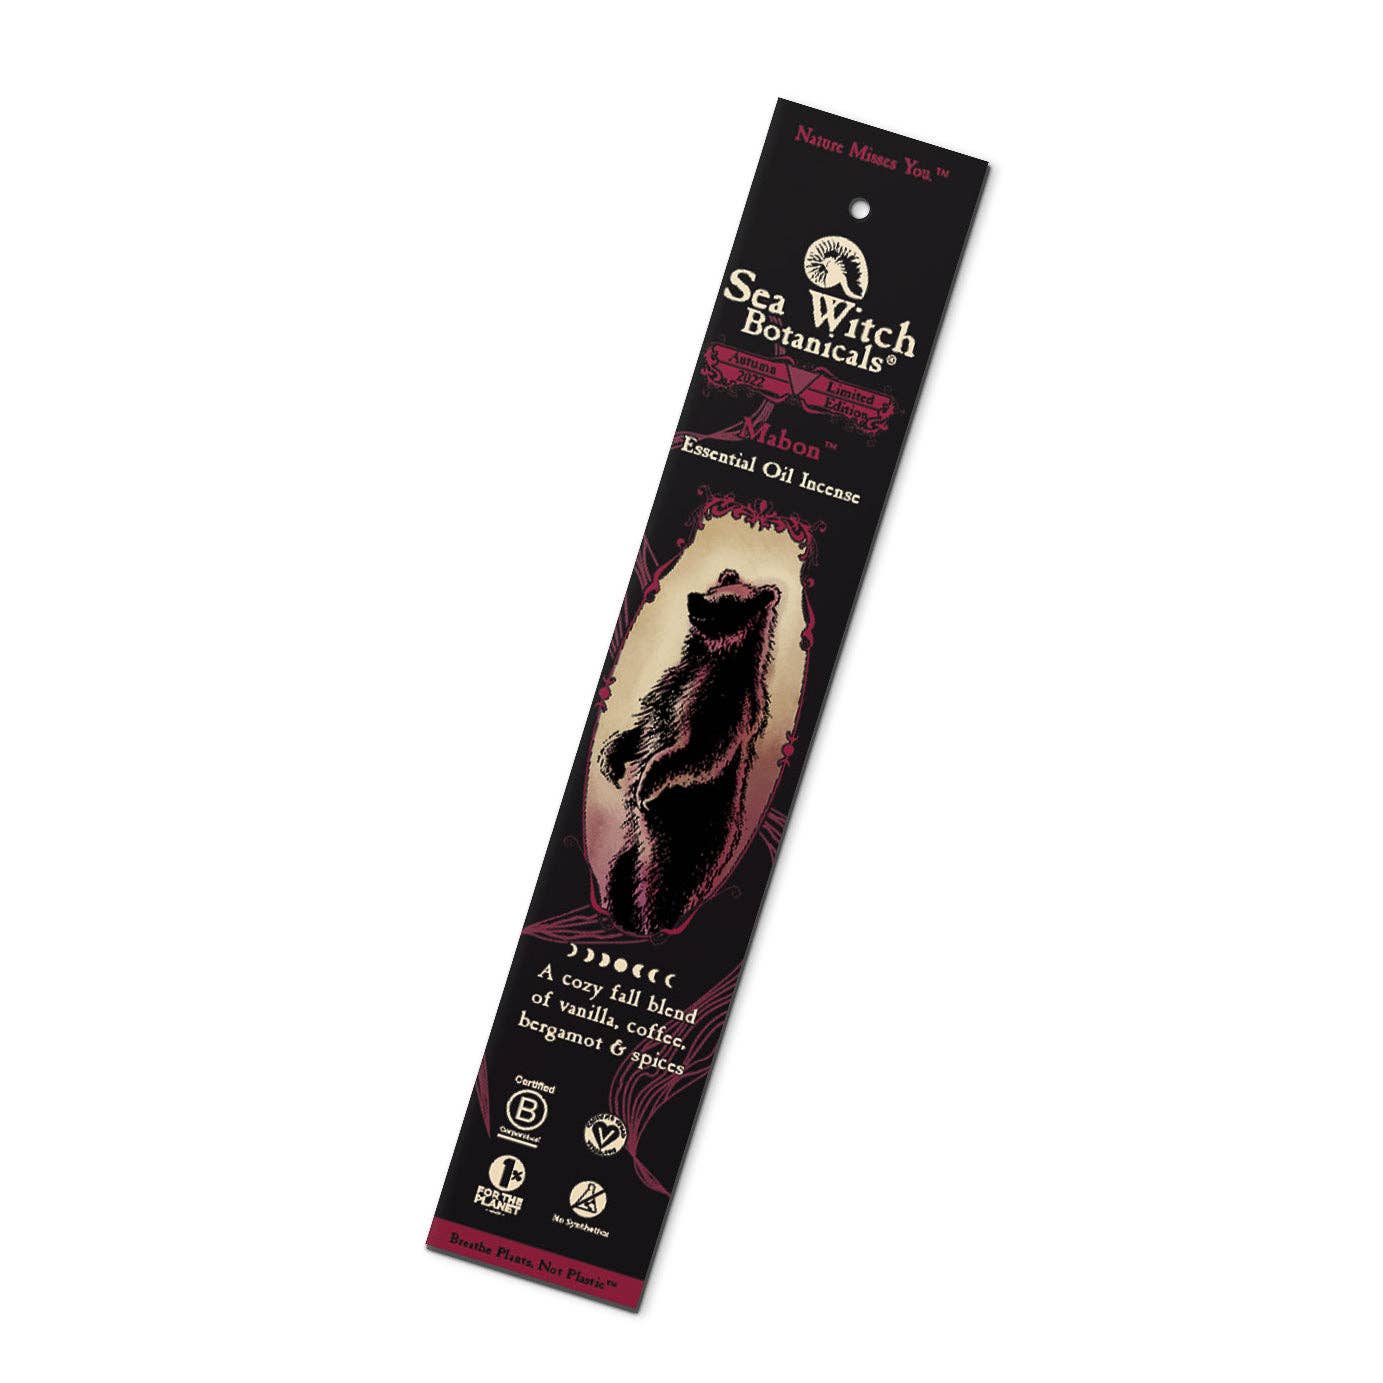 Mabon™ Incense: with All-Natural Coffee, Vanilla, Bergamot, & Spices